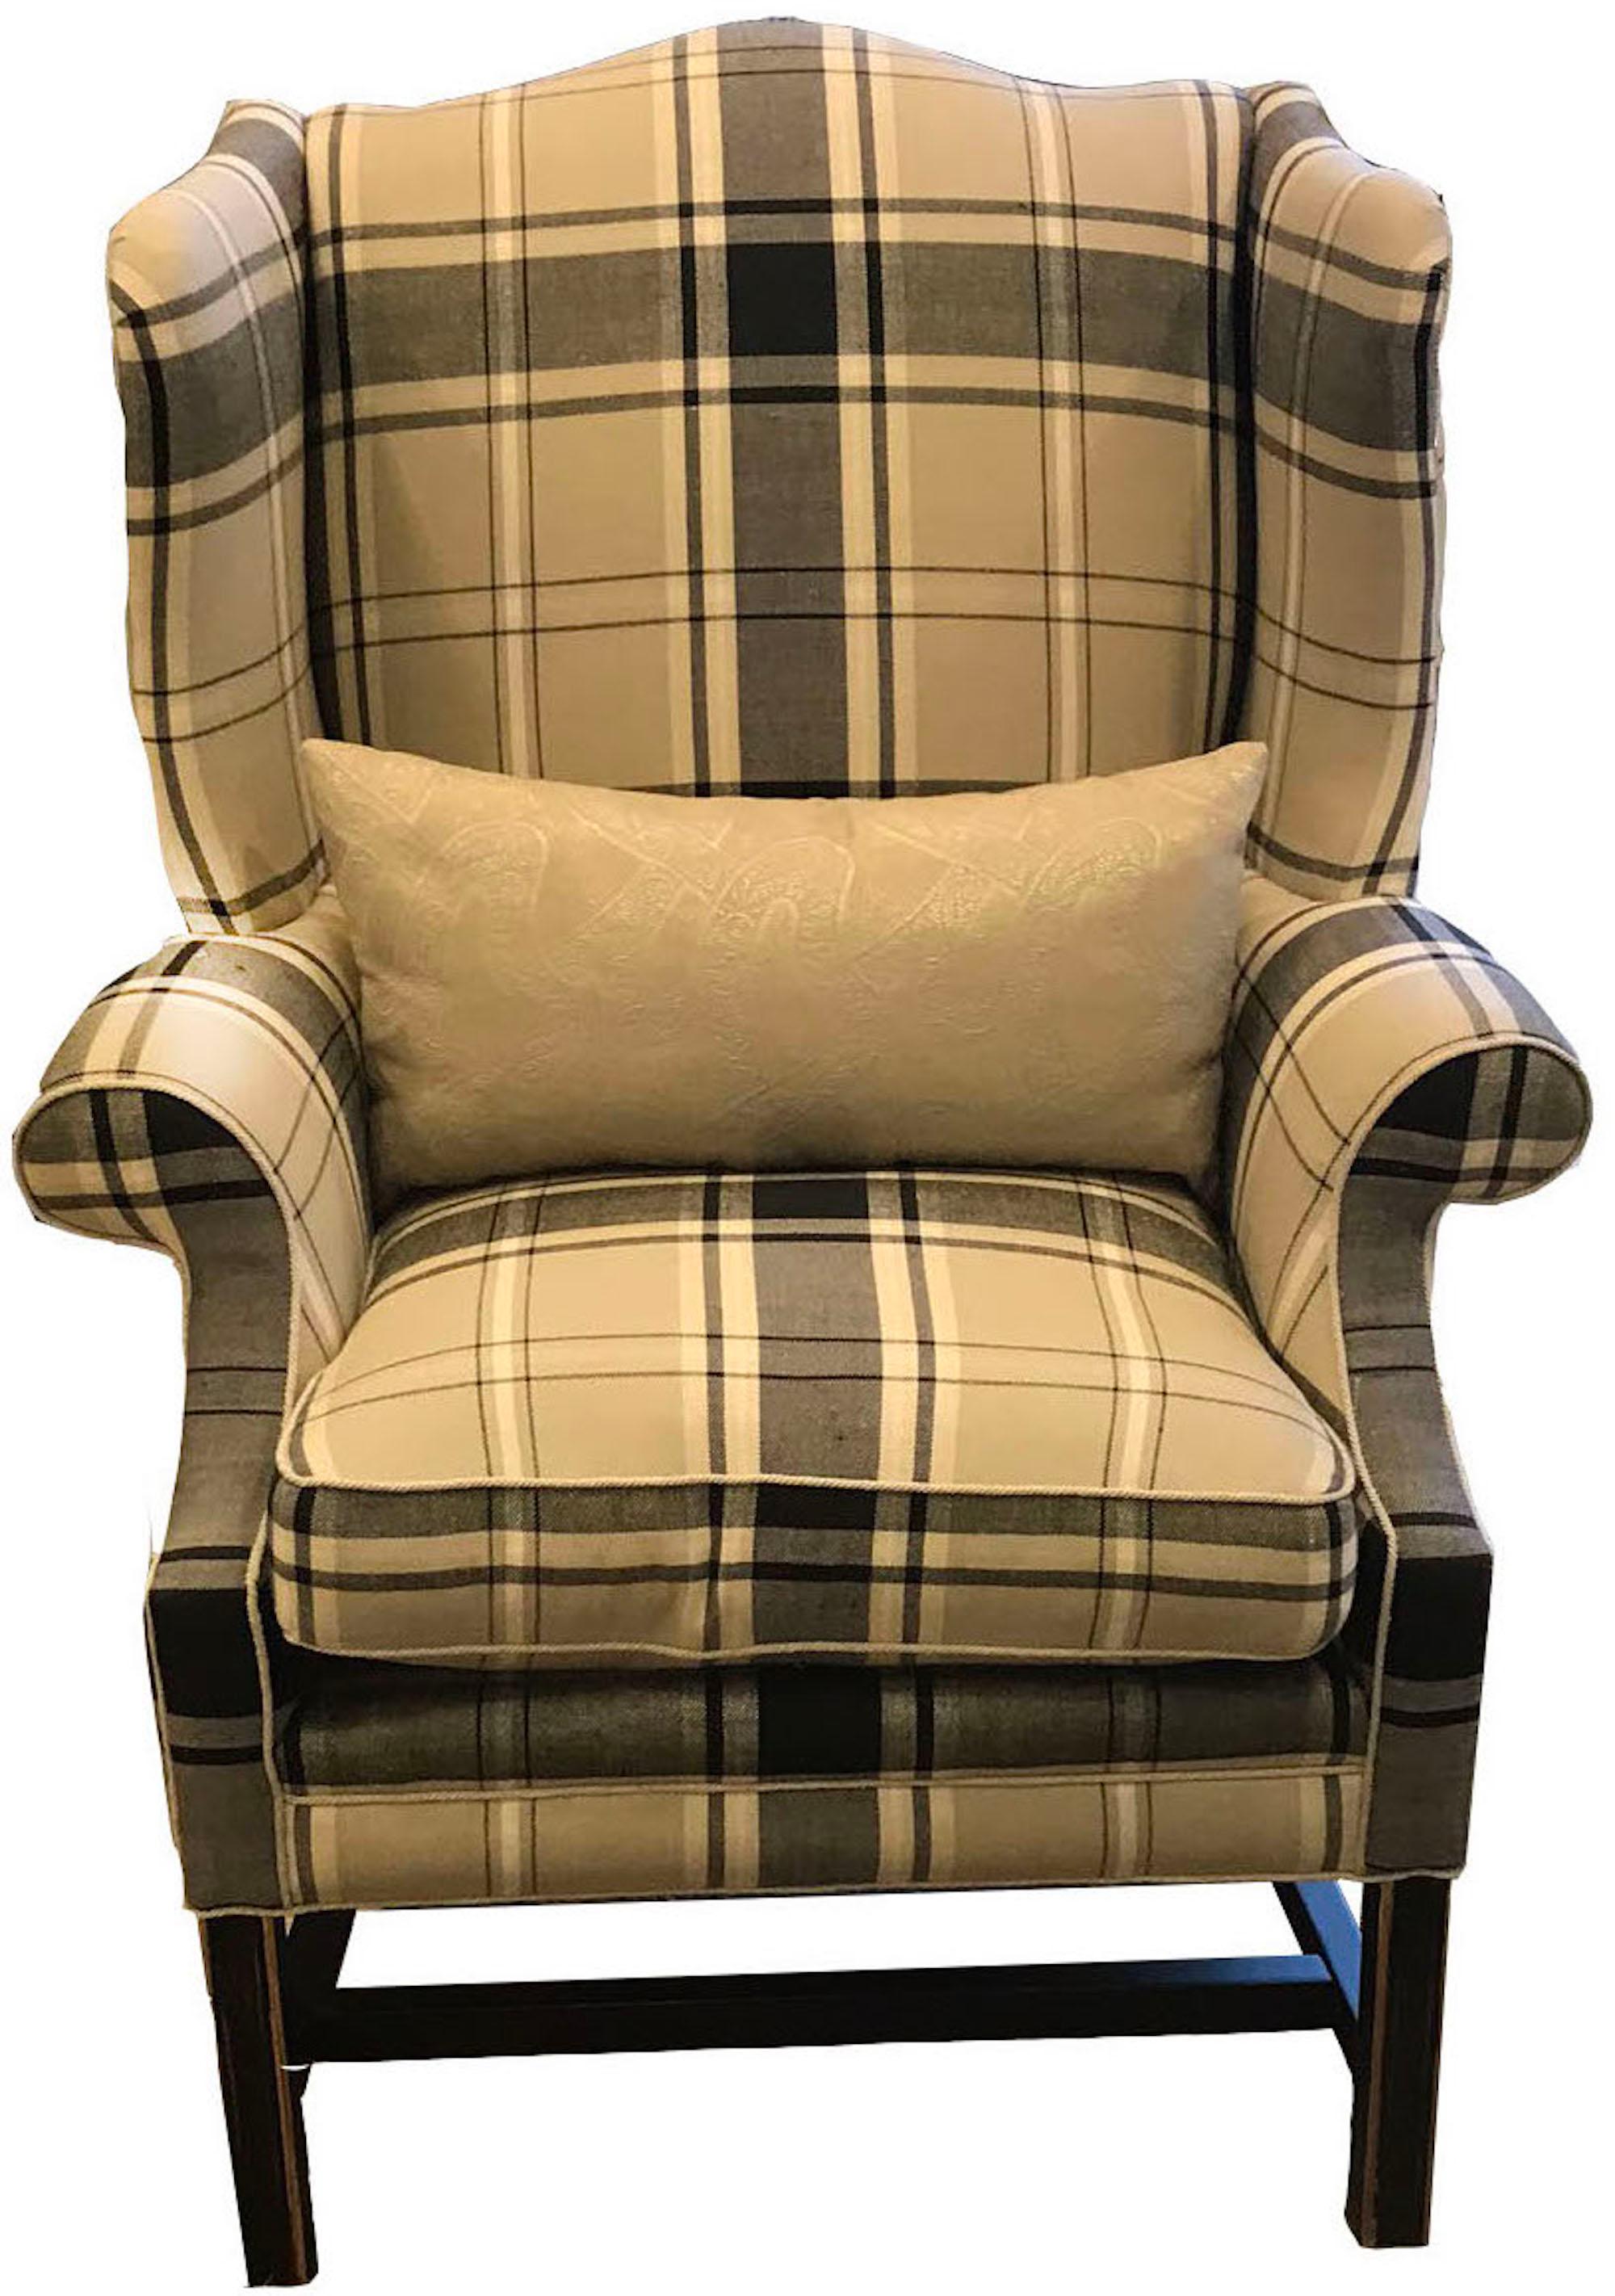 This Hudson wing chair features a maple wood frame that is upholstered in Schumacher's Alexander Tartan fabric in a matte ebony colorway. Atop the frame is a box edge down/feather fill seat cushion with self welt edges and arm rests on either side.